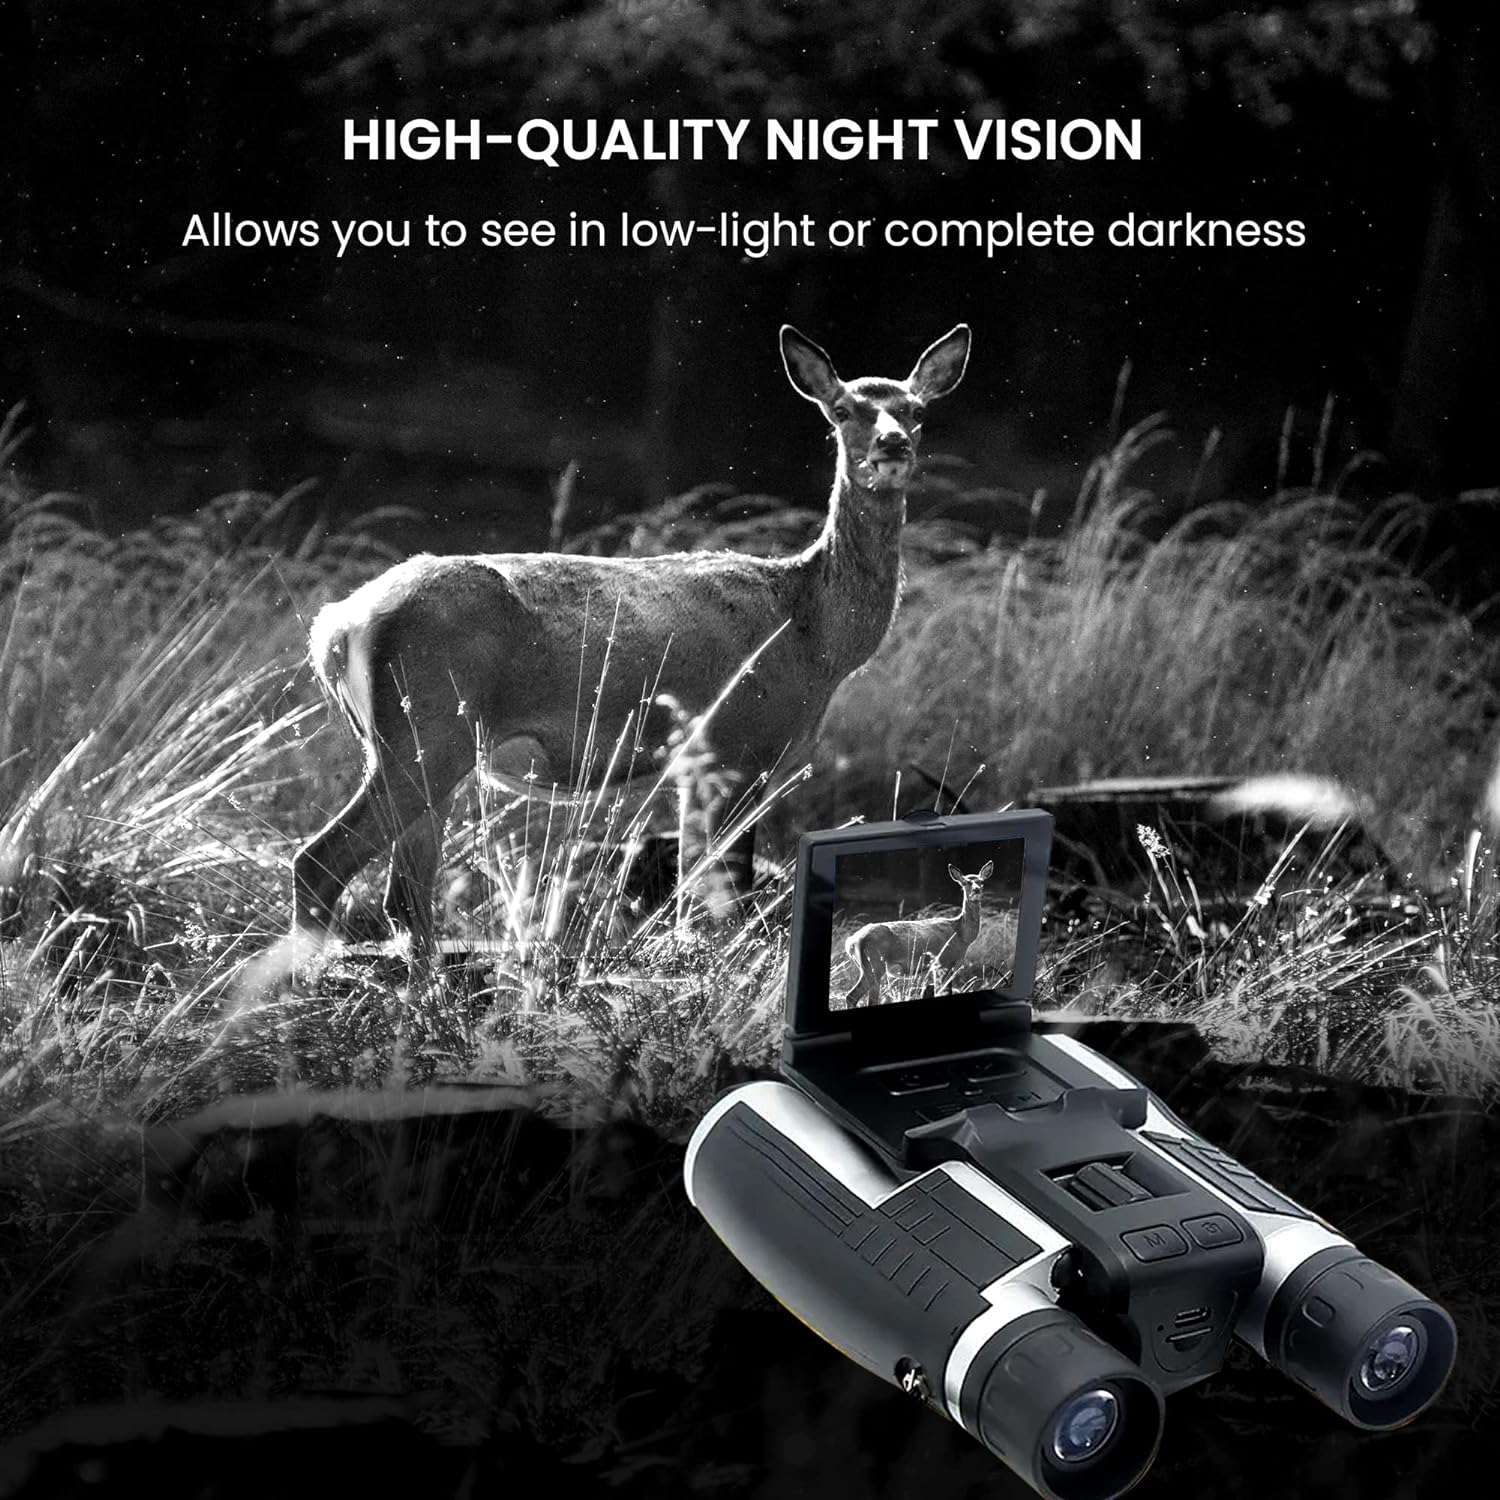 High Powered Binoculars 12 x 32 with Dual Digital Camera  Video Recording – Binocular Compact 5MP Camcorder for Bird Watching, Football, Concerts, and Hunting with 2.4” LCD Screen Night Vision Zoom